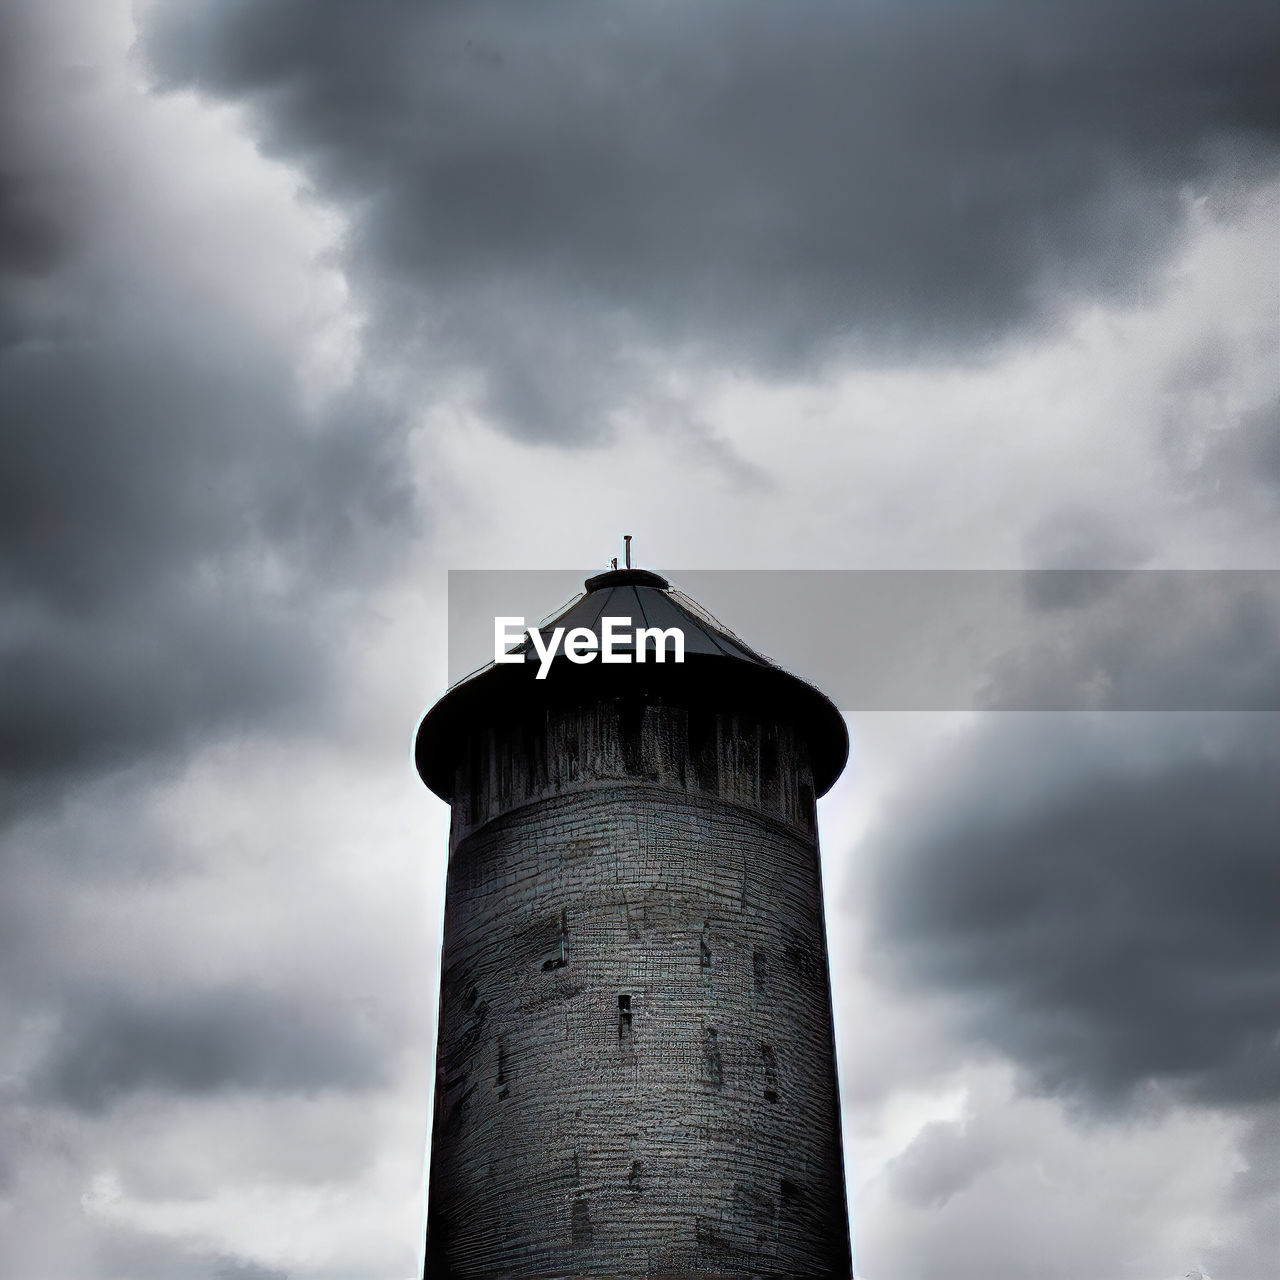 cloud, architecture, sky, built structure, building exterior, tower, guidance, lighthouse, nature, building, protection, low angle view, security, no people, storm, outdoors, overcast, black and white, monochrome, day, history, dramatic sky, the past, darkness, cloudscape, environment